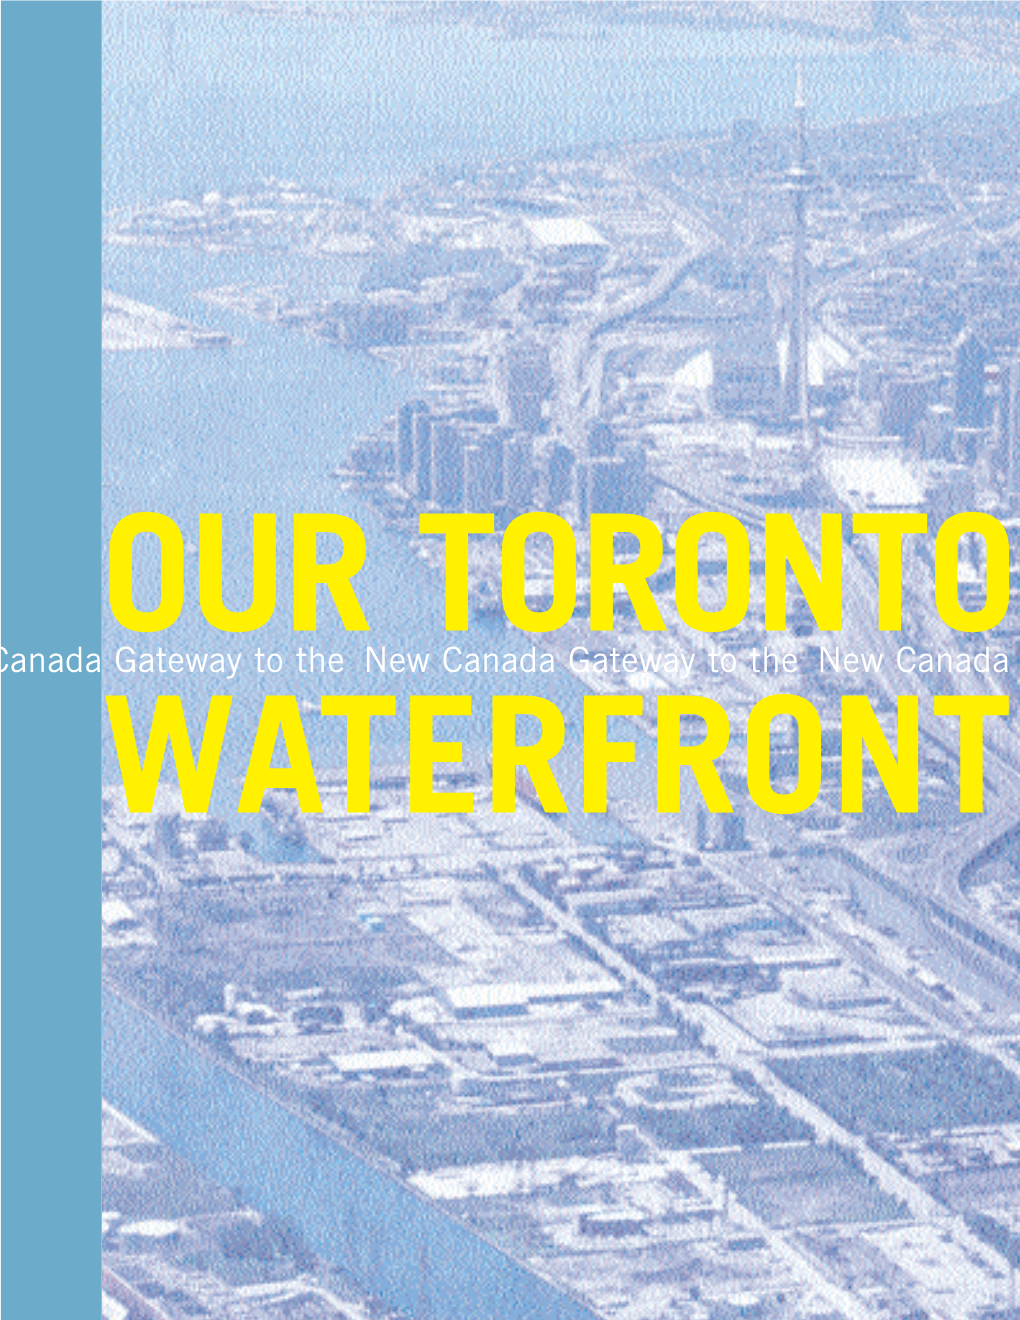 Our Toronto Waterfront! the Wave of the Future”